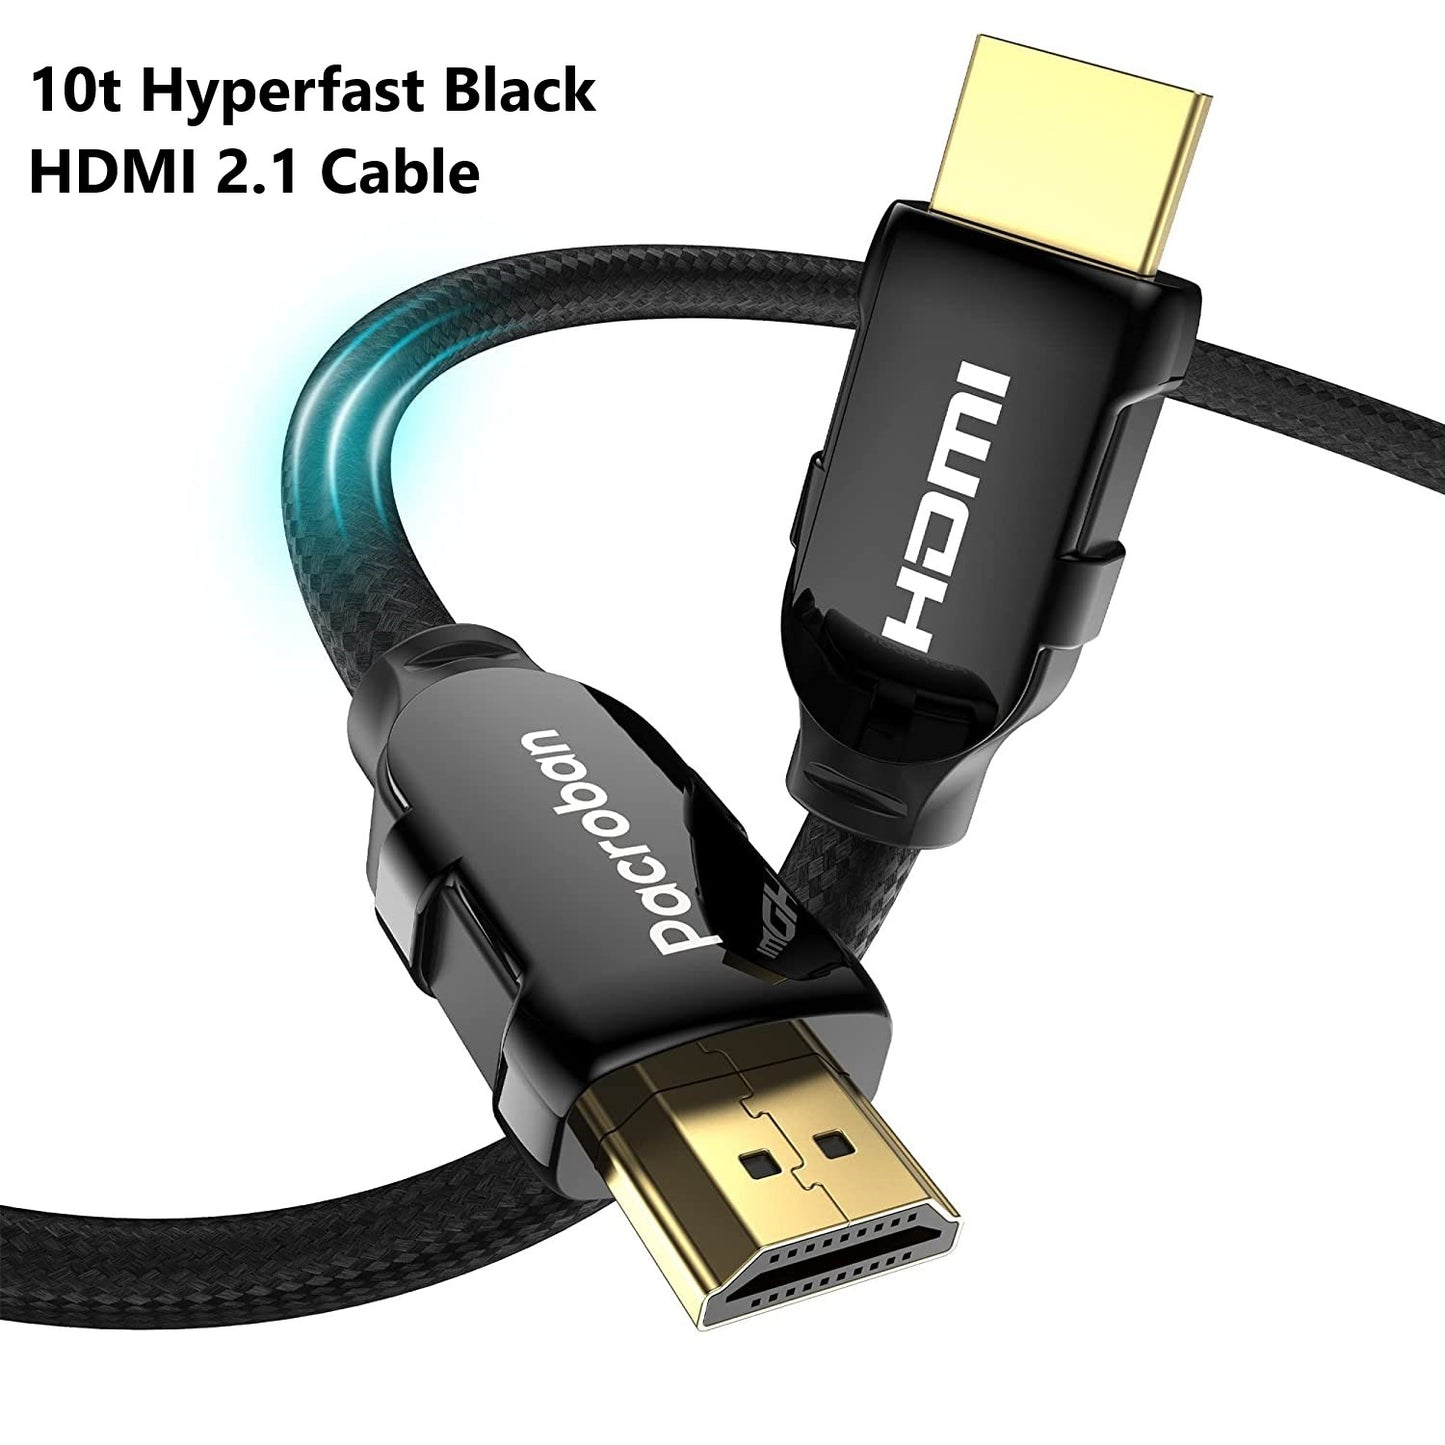 Multiple (Slim HDMI, HDMI 2.1 Cable, USB C to USB, USB to VGA adopter) Cables Box